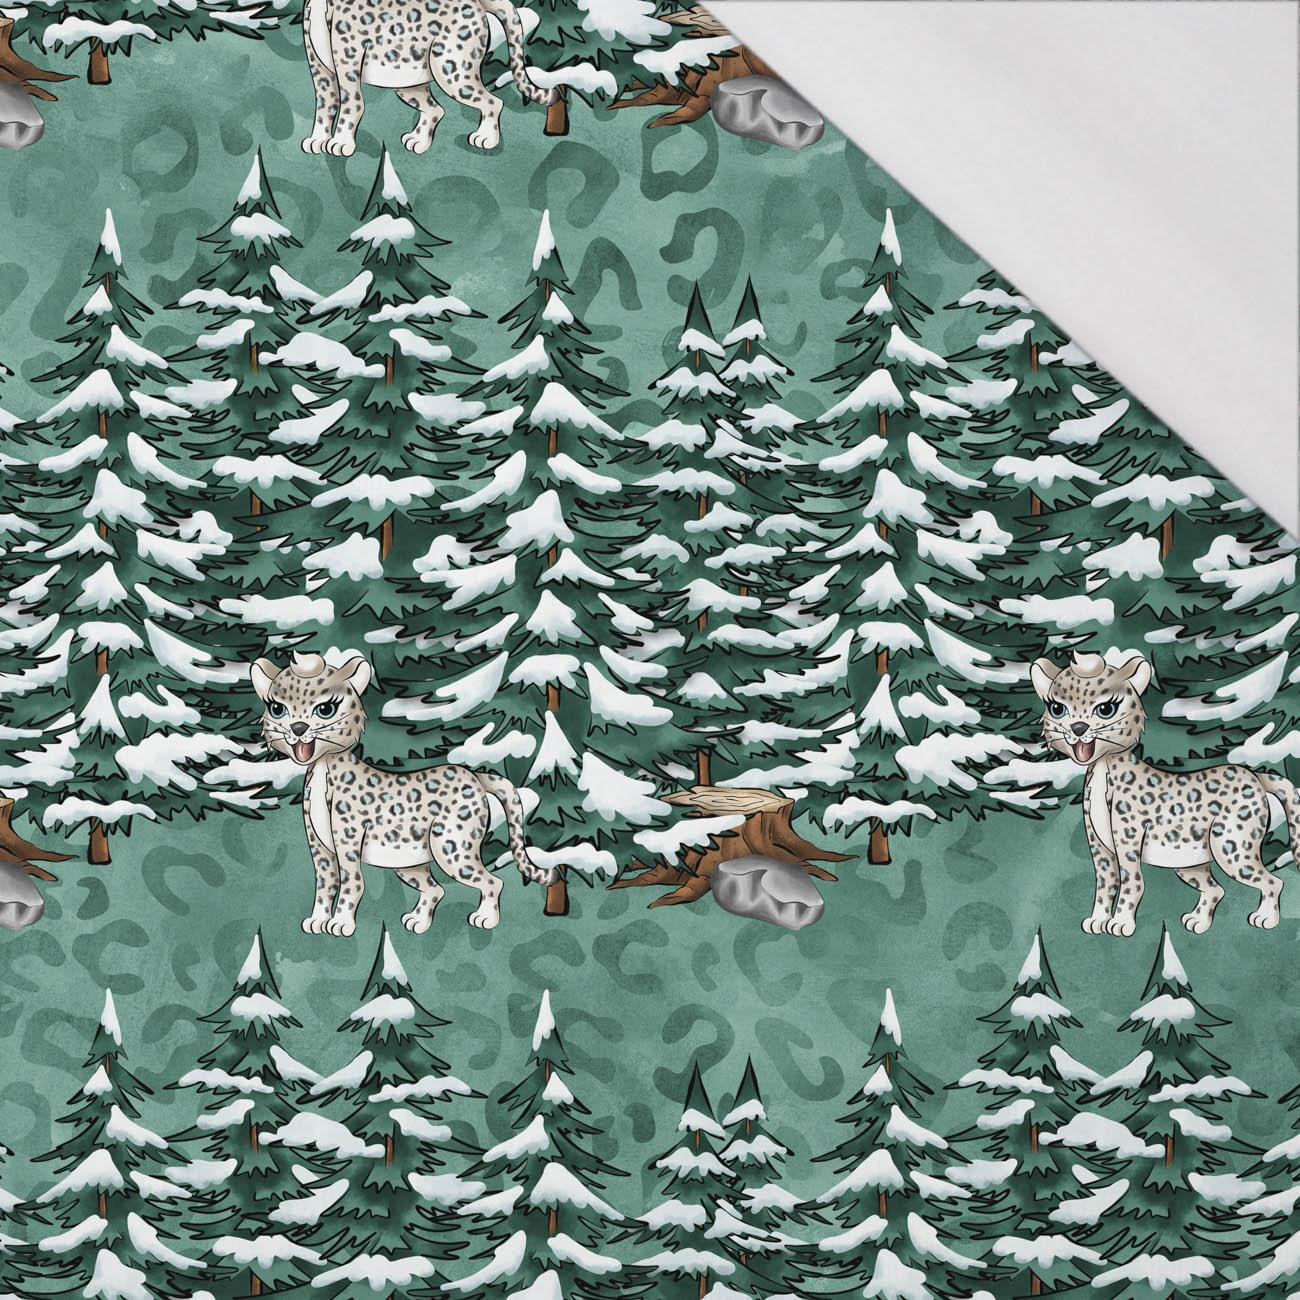 LEOPARDS IN THE FOREST (SNOW LEOPARDS) - single jersey with elastane 